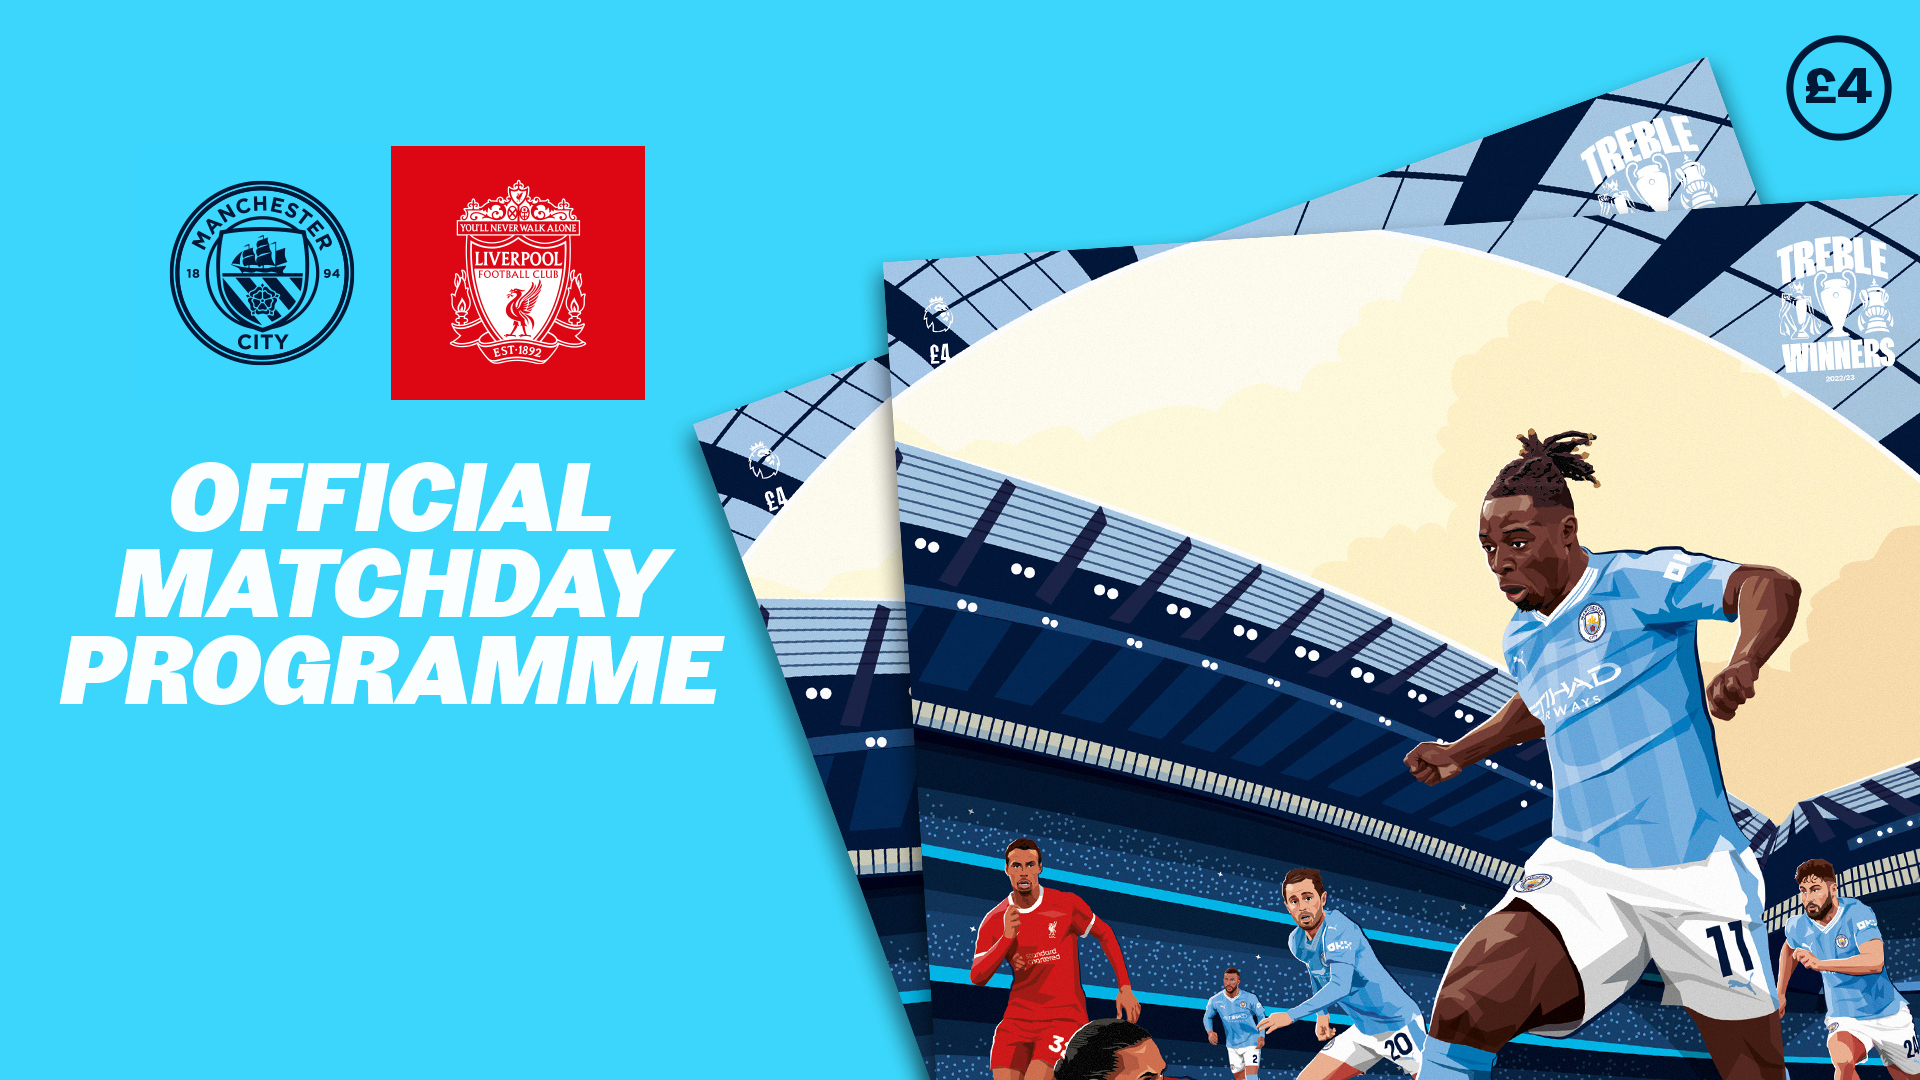 Liverpool FC - Our first Premier League matchday of the